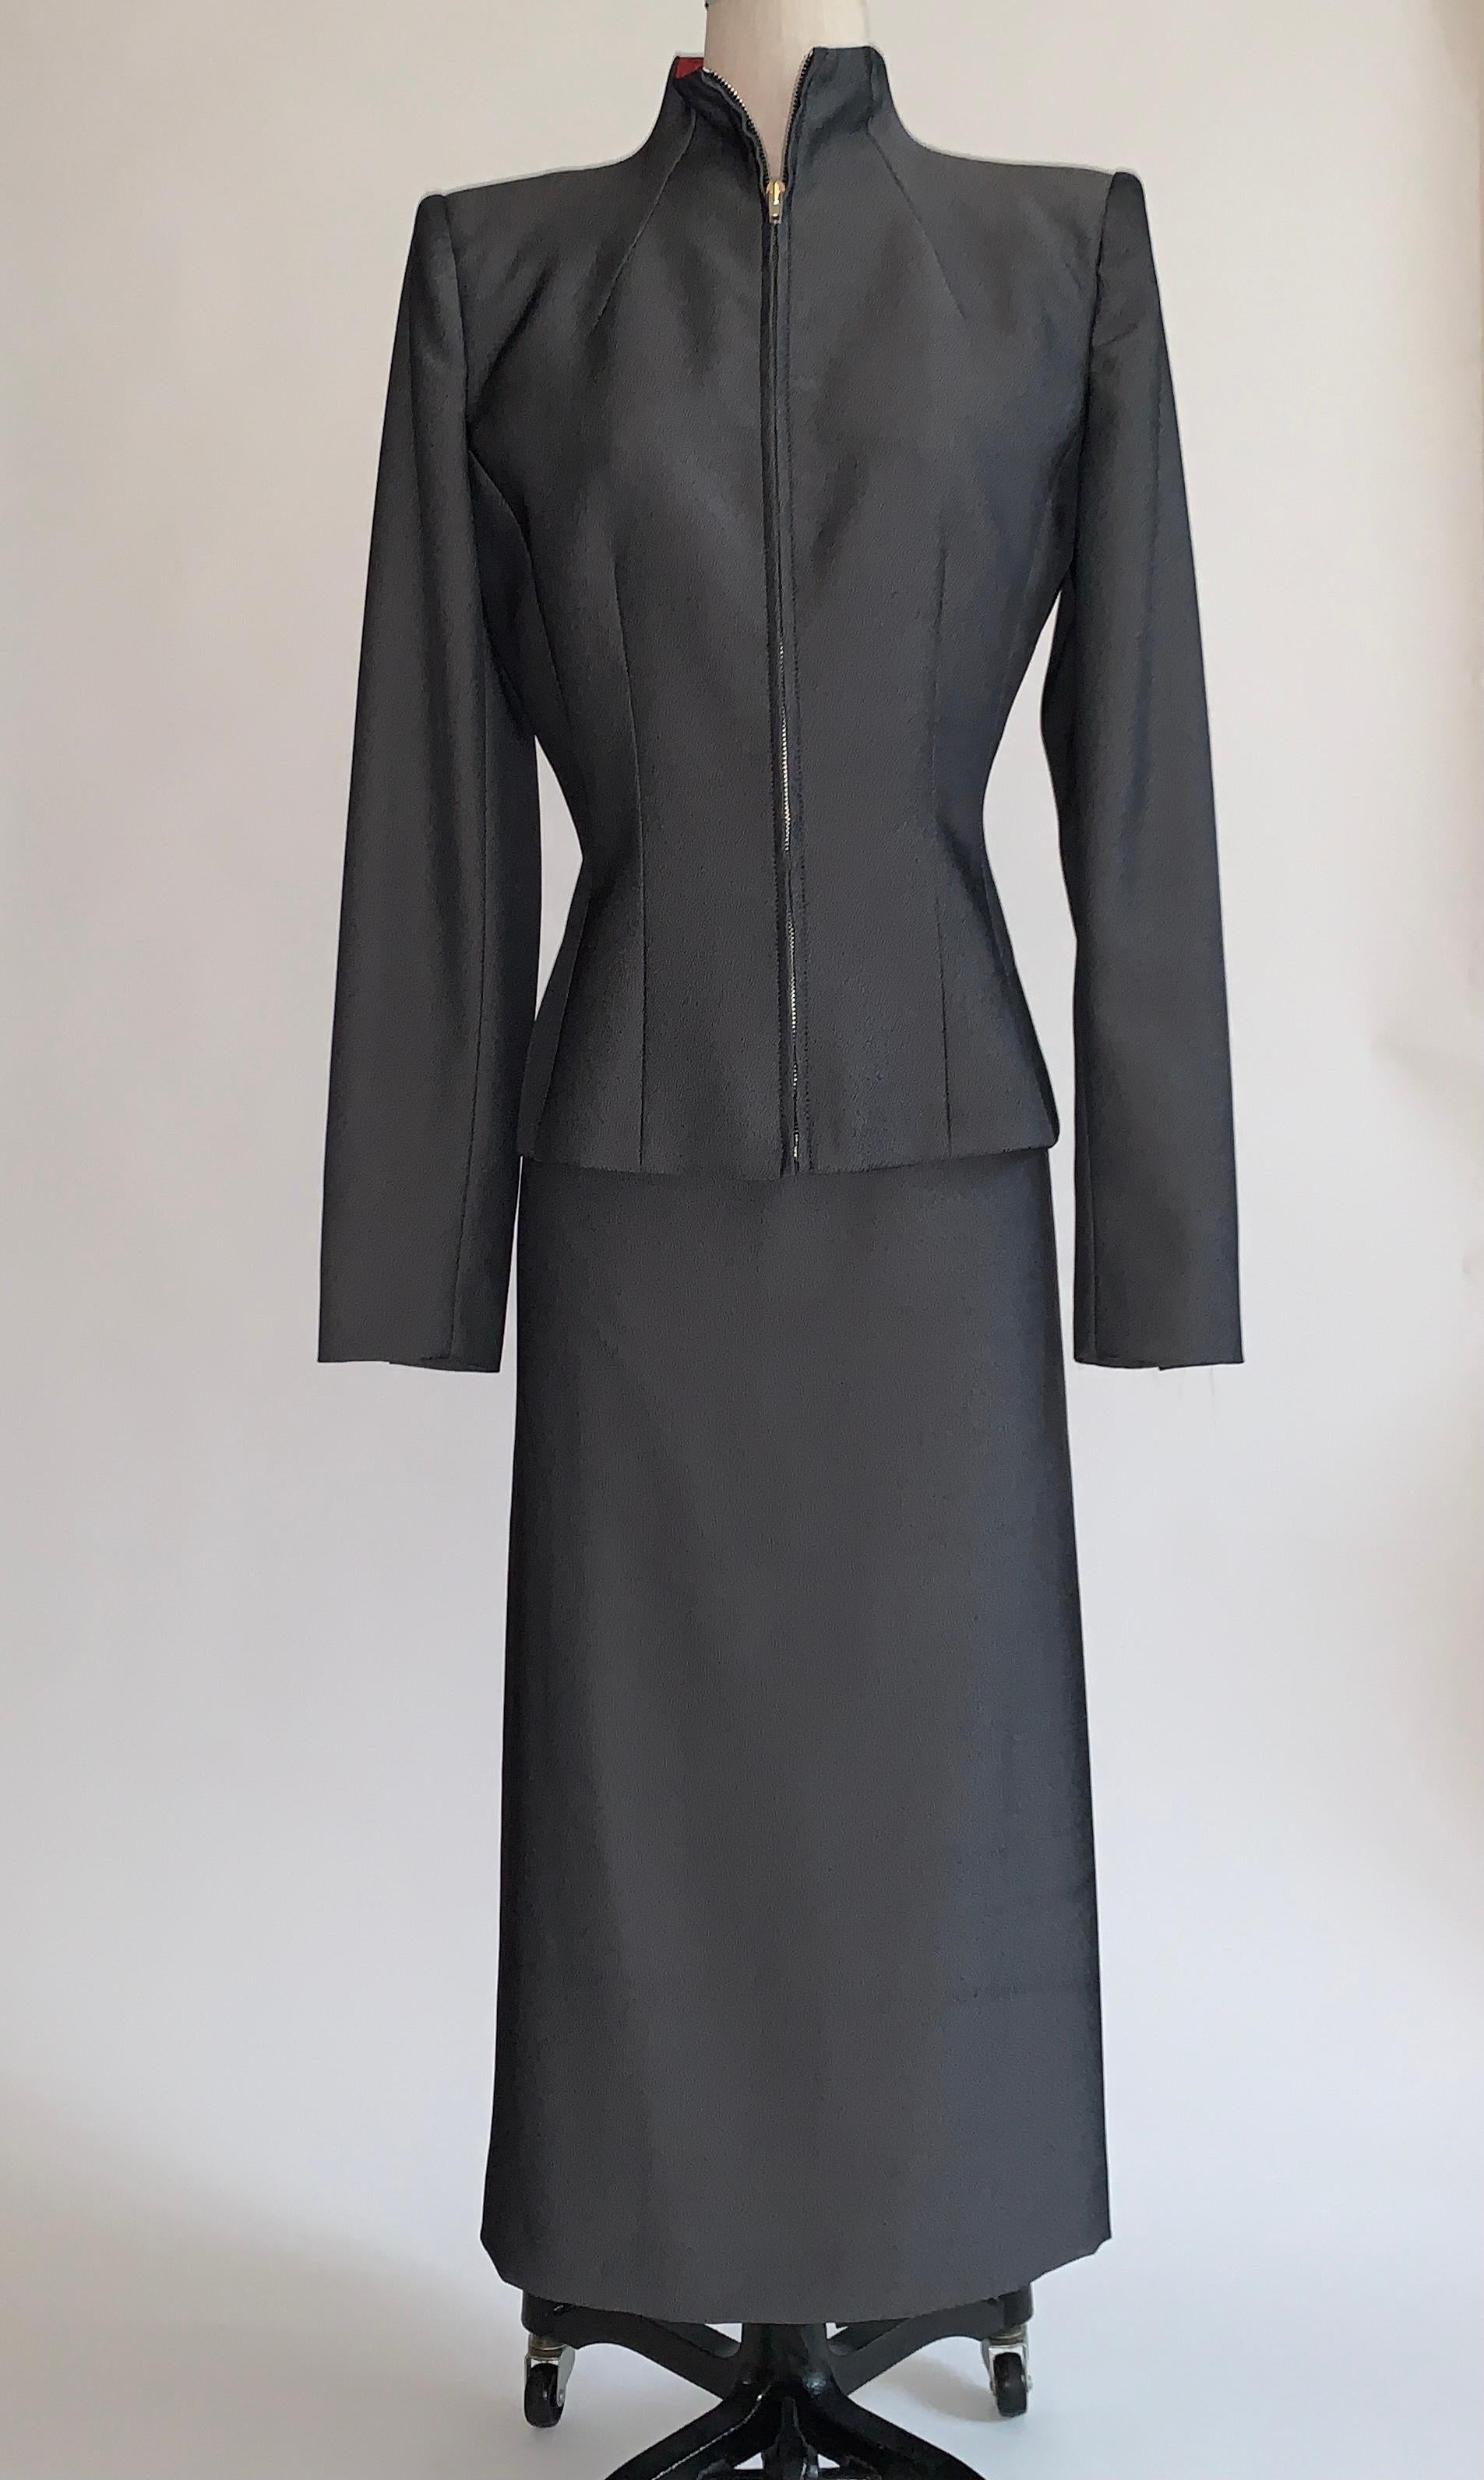 Vintage 1990s Alexander Mcqueen grey skirt suit from the 1998 Joan collection. Suit is made of a beautiful grey and black fabric with a light sheen. Amazingly tailored jacket has zippered front and light padding at shoulders for shape. Midi length